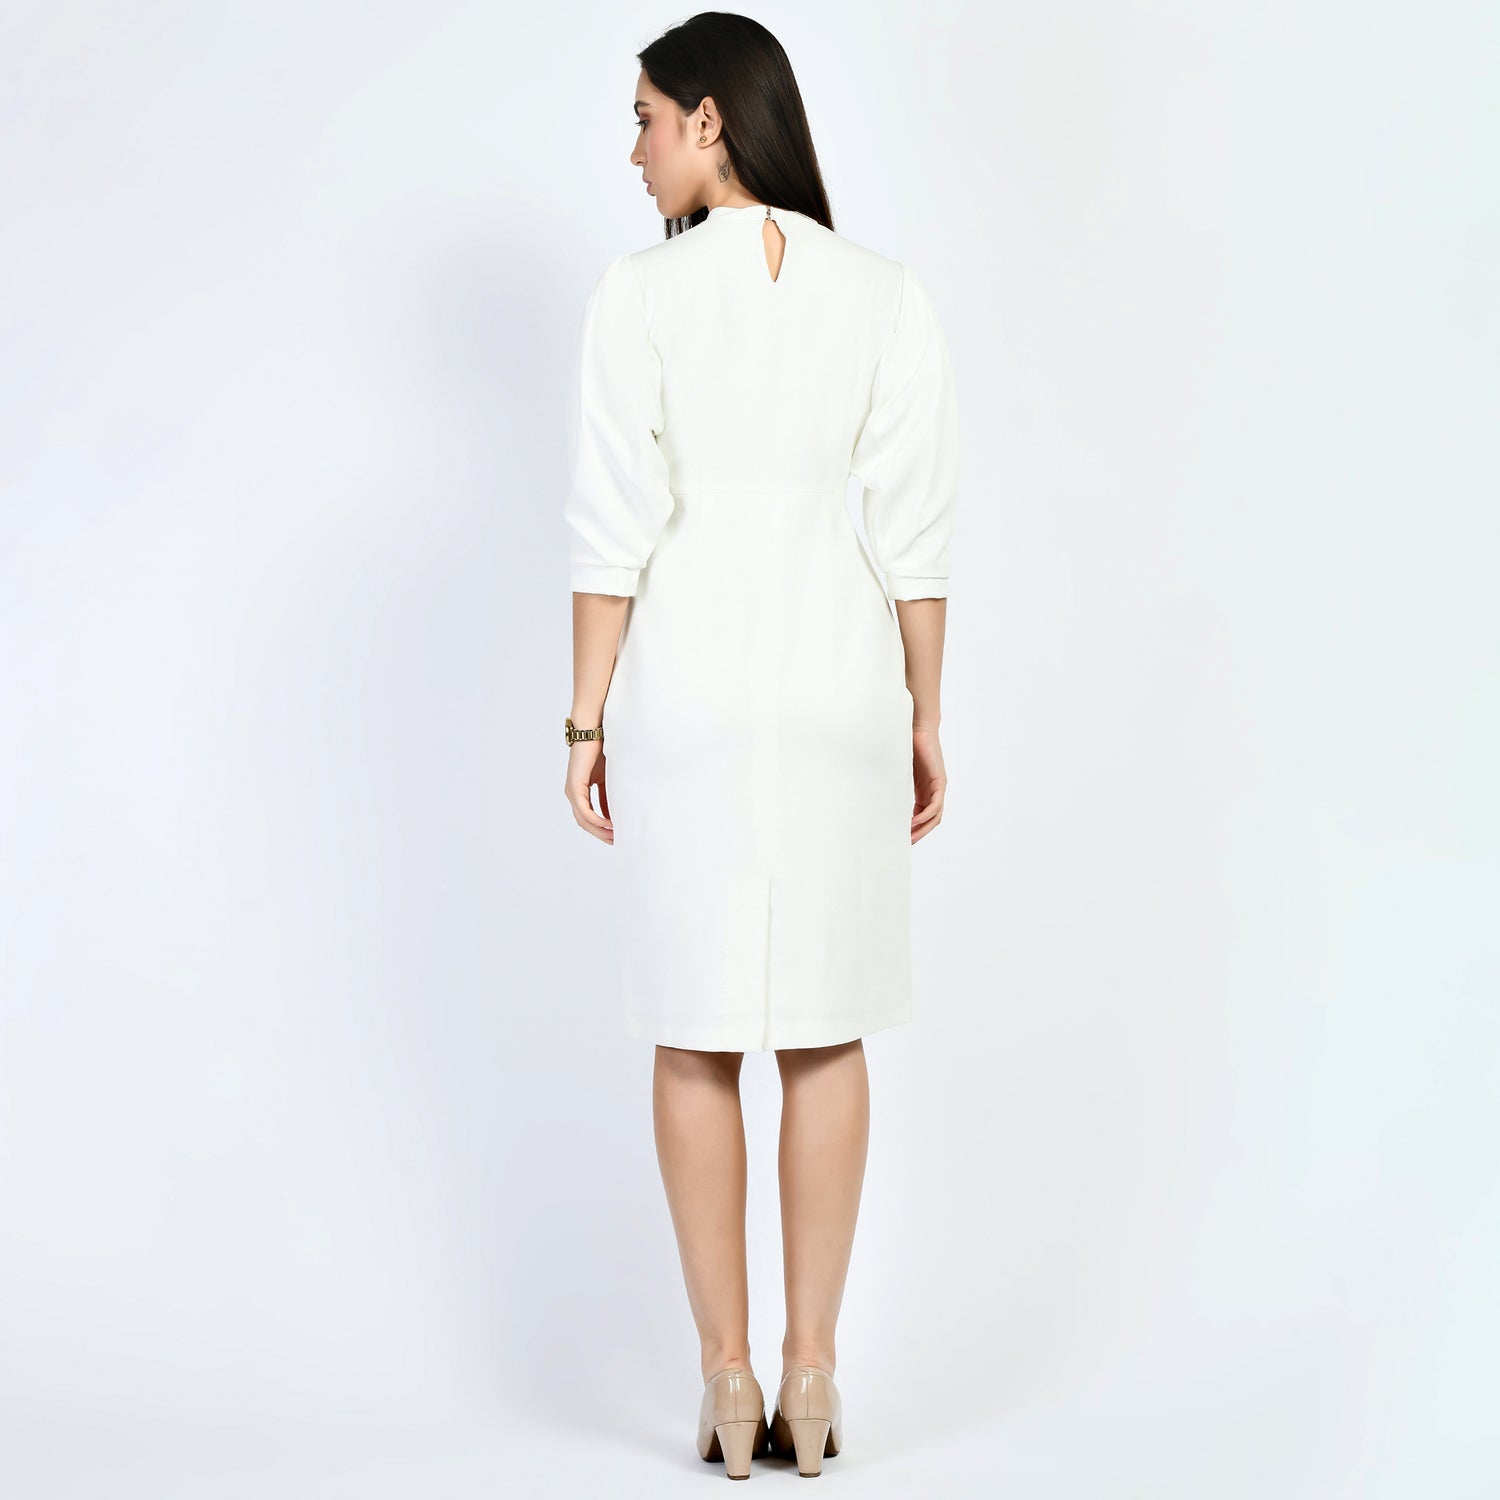 Exude Allure Puffed Sleeves Sheath Dress (White)